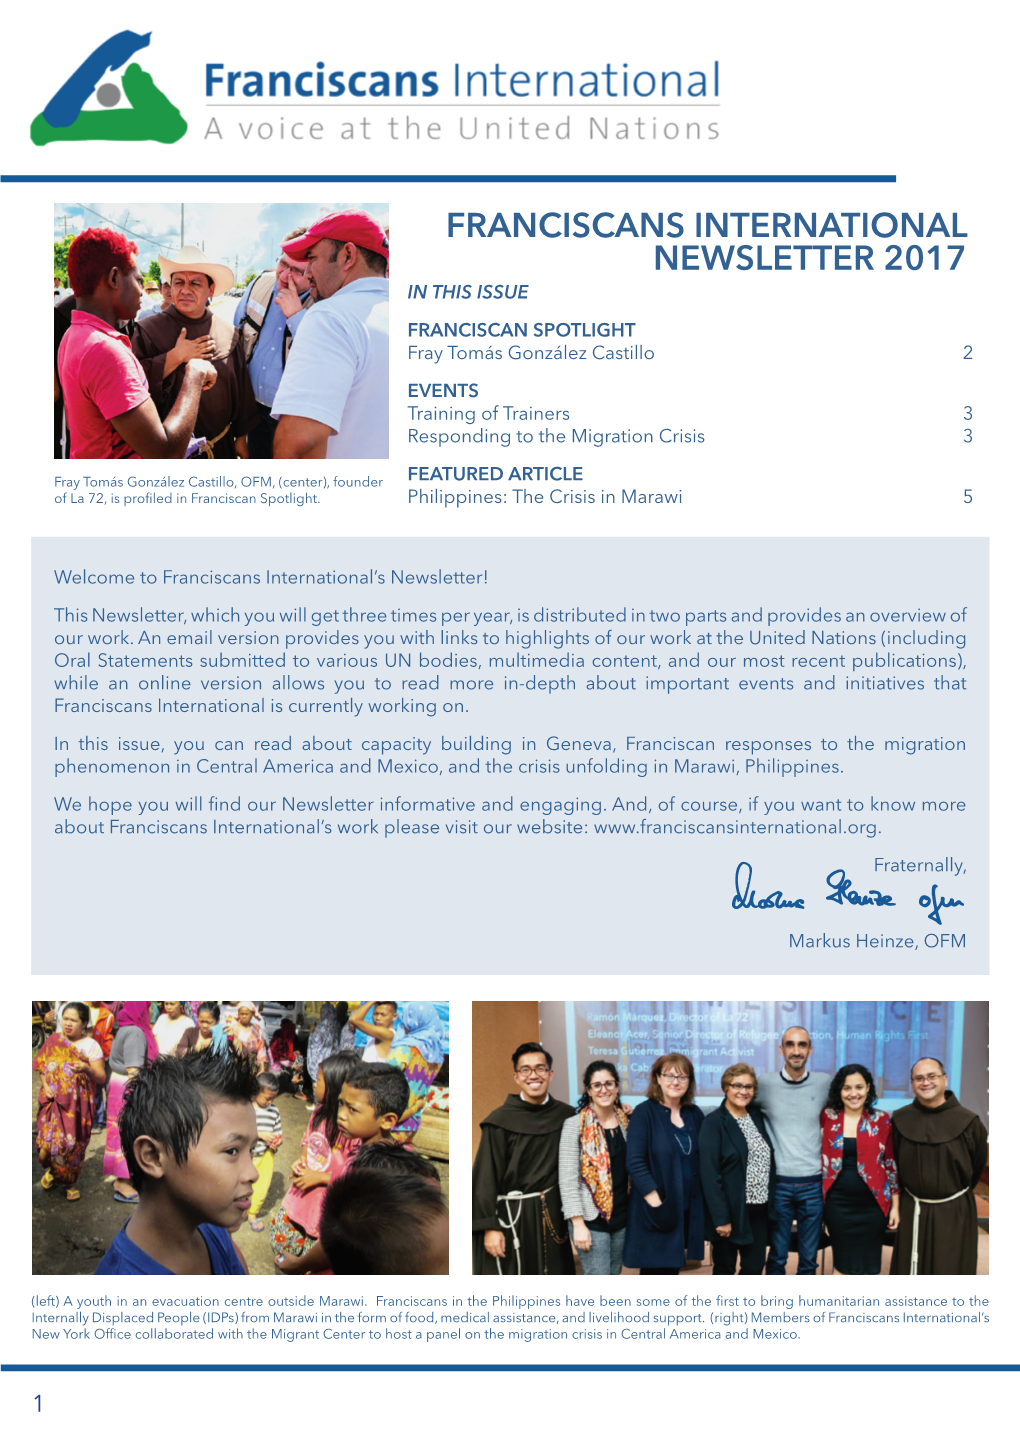 Franciscans International Newsletter 2017 in This Issue